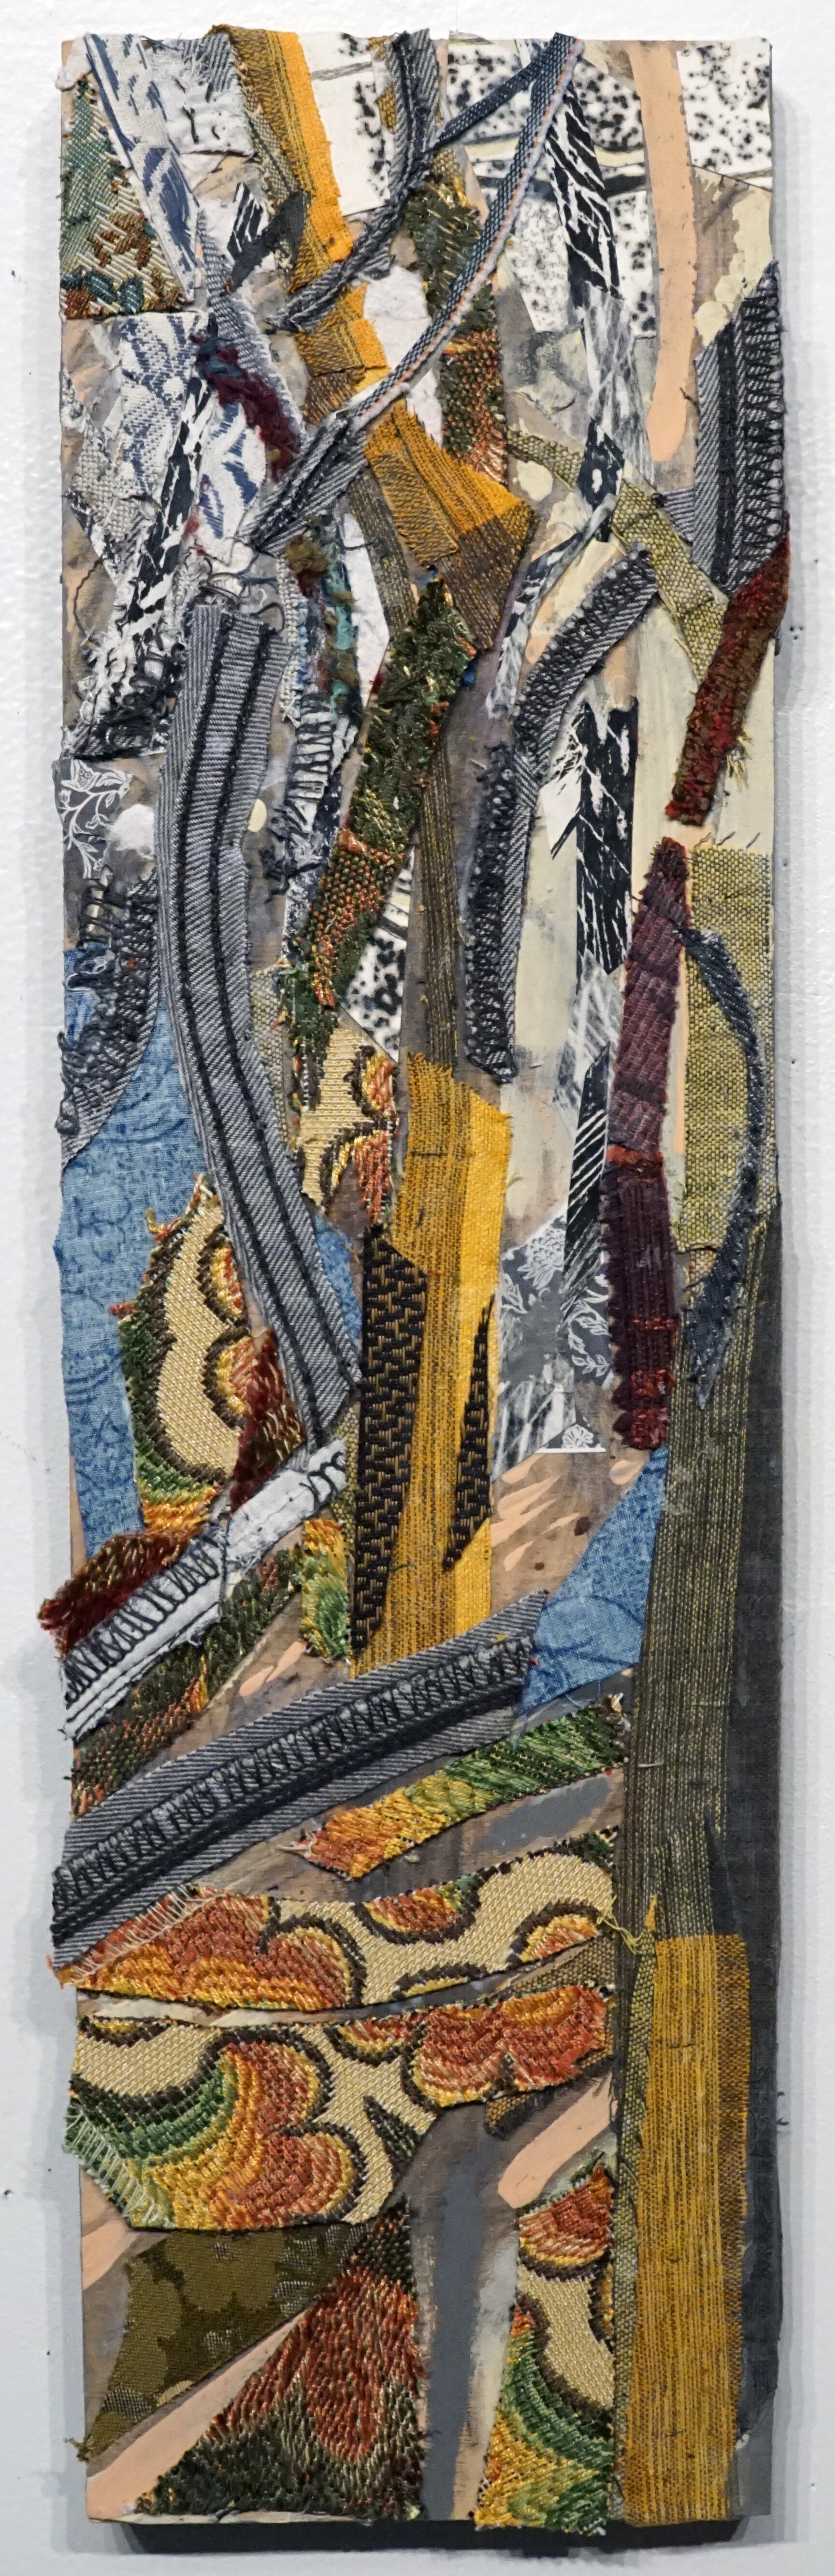   Piney Refuge , 2020, mixed media on wood panel, 19 x 5 1/2 inches 